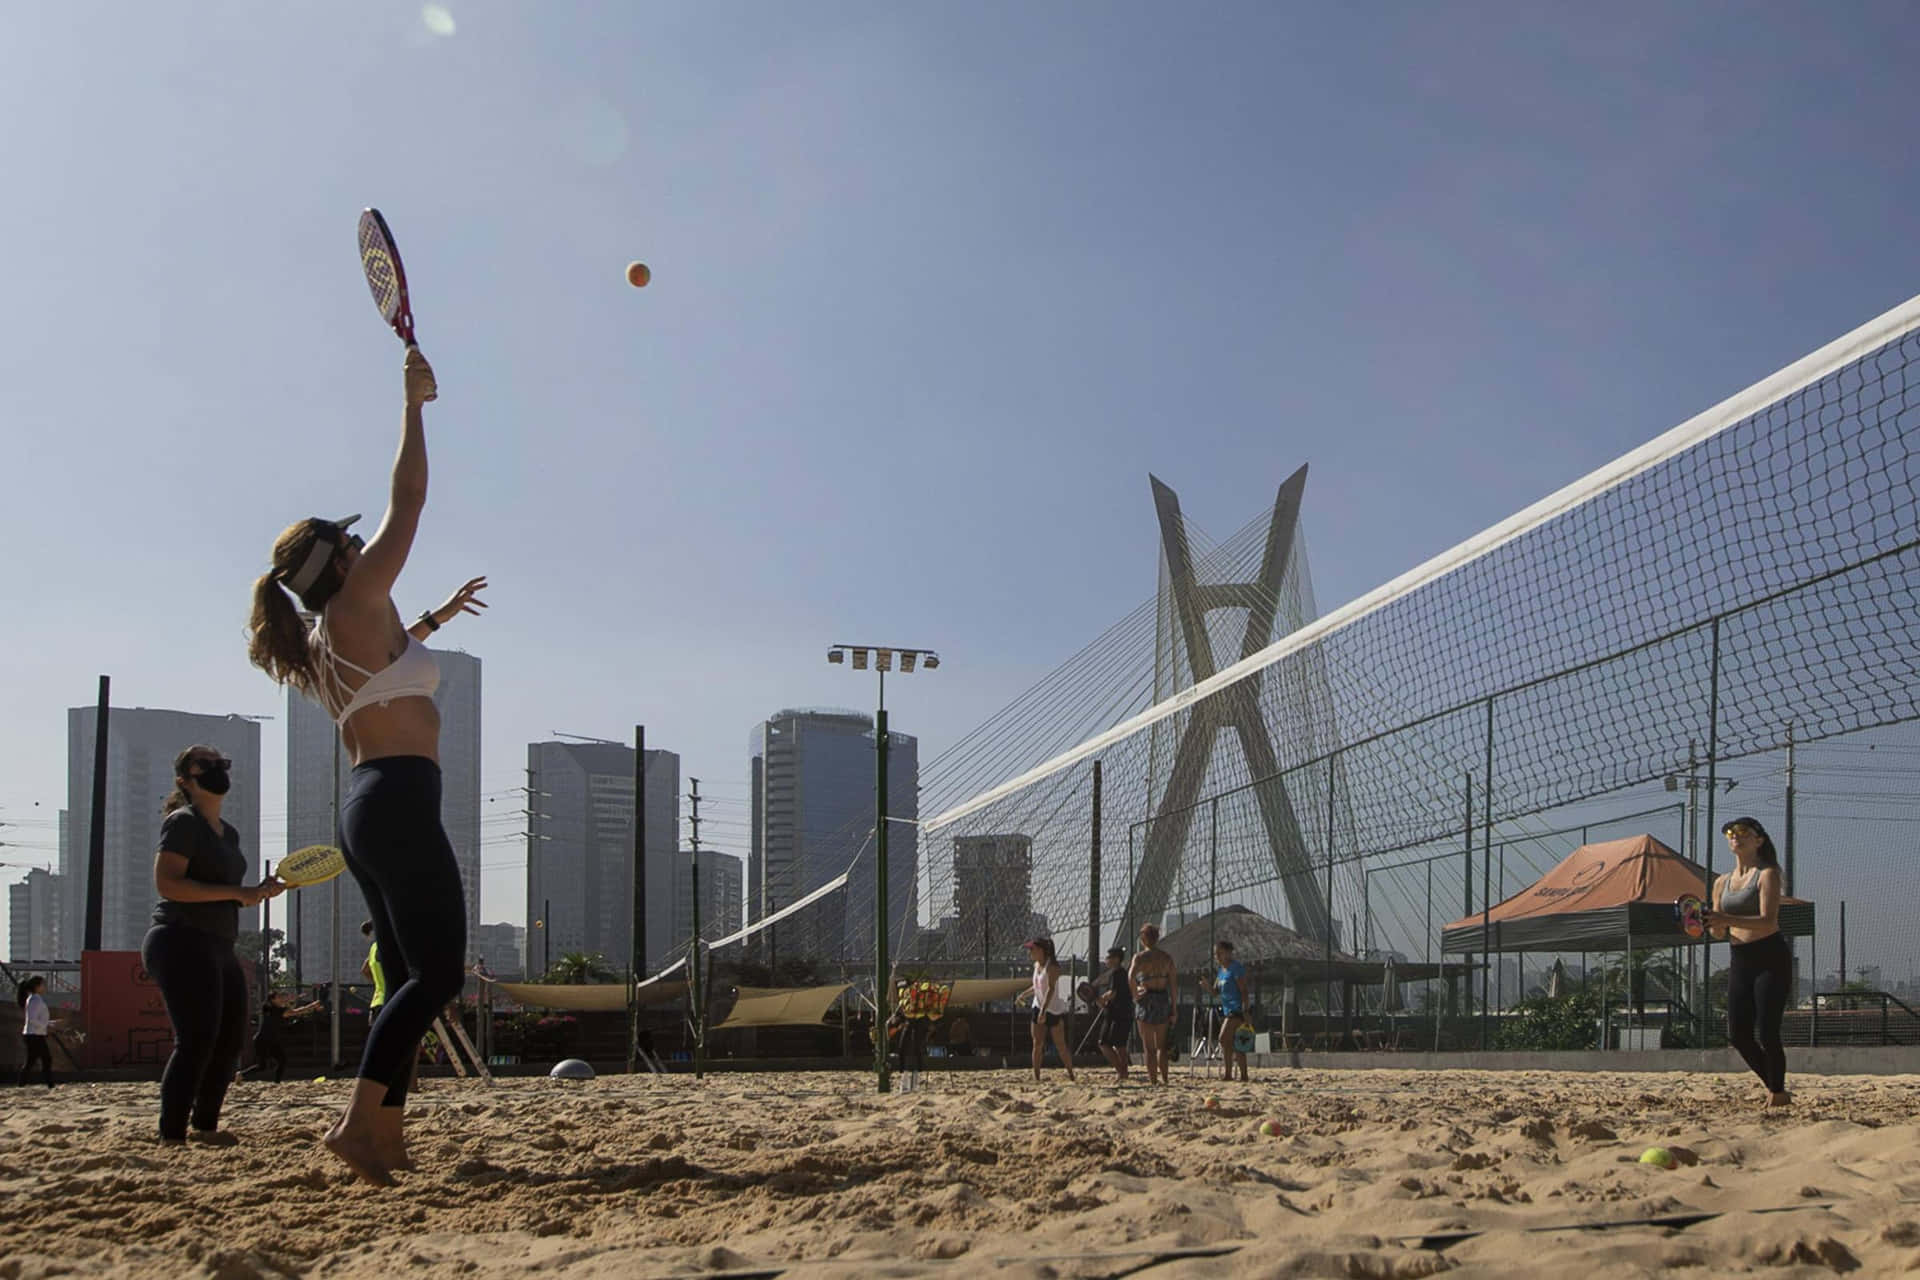 Exciting game of beach tennis in the sun Wallpaper